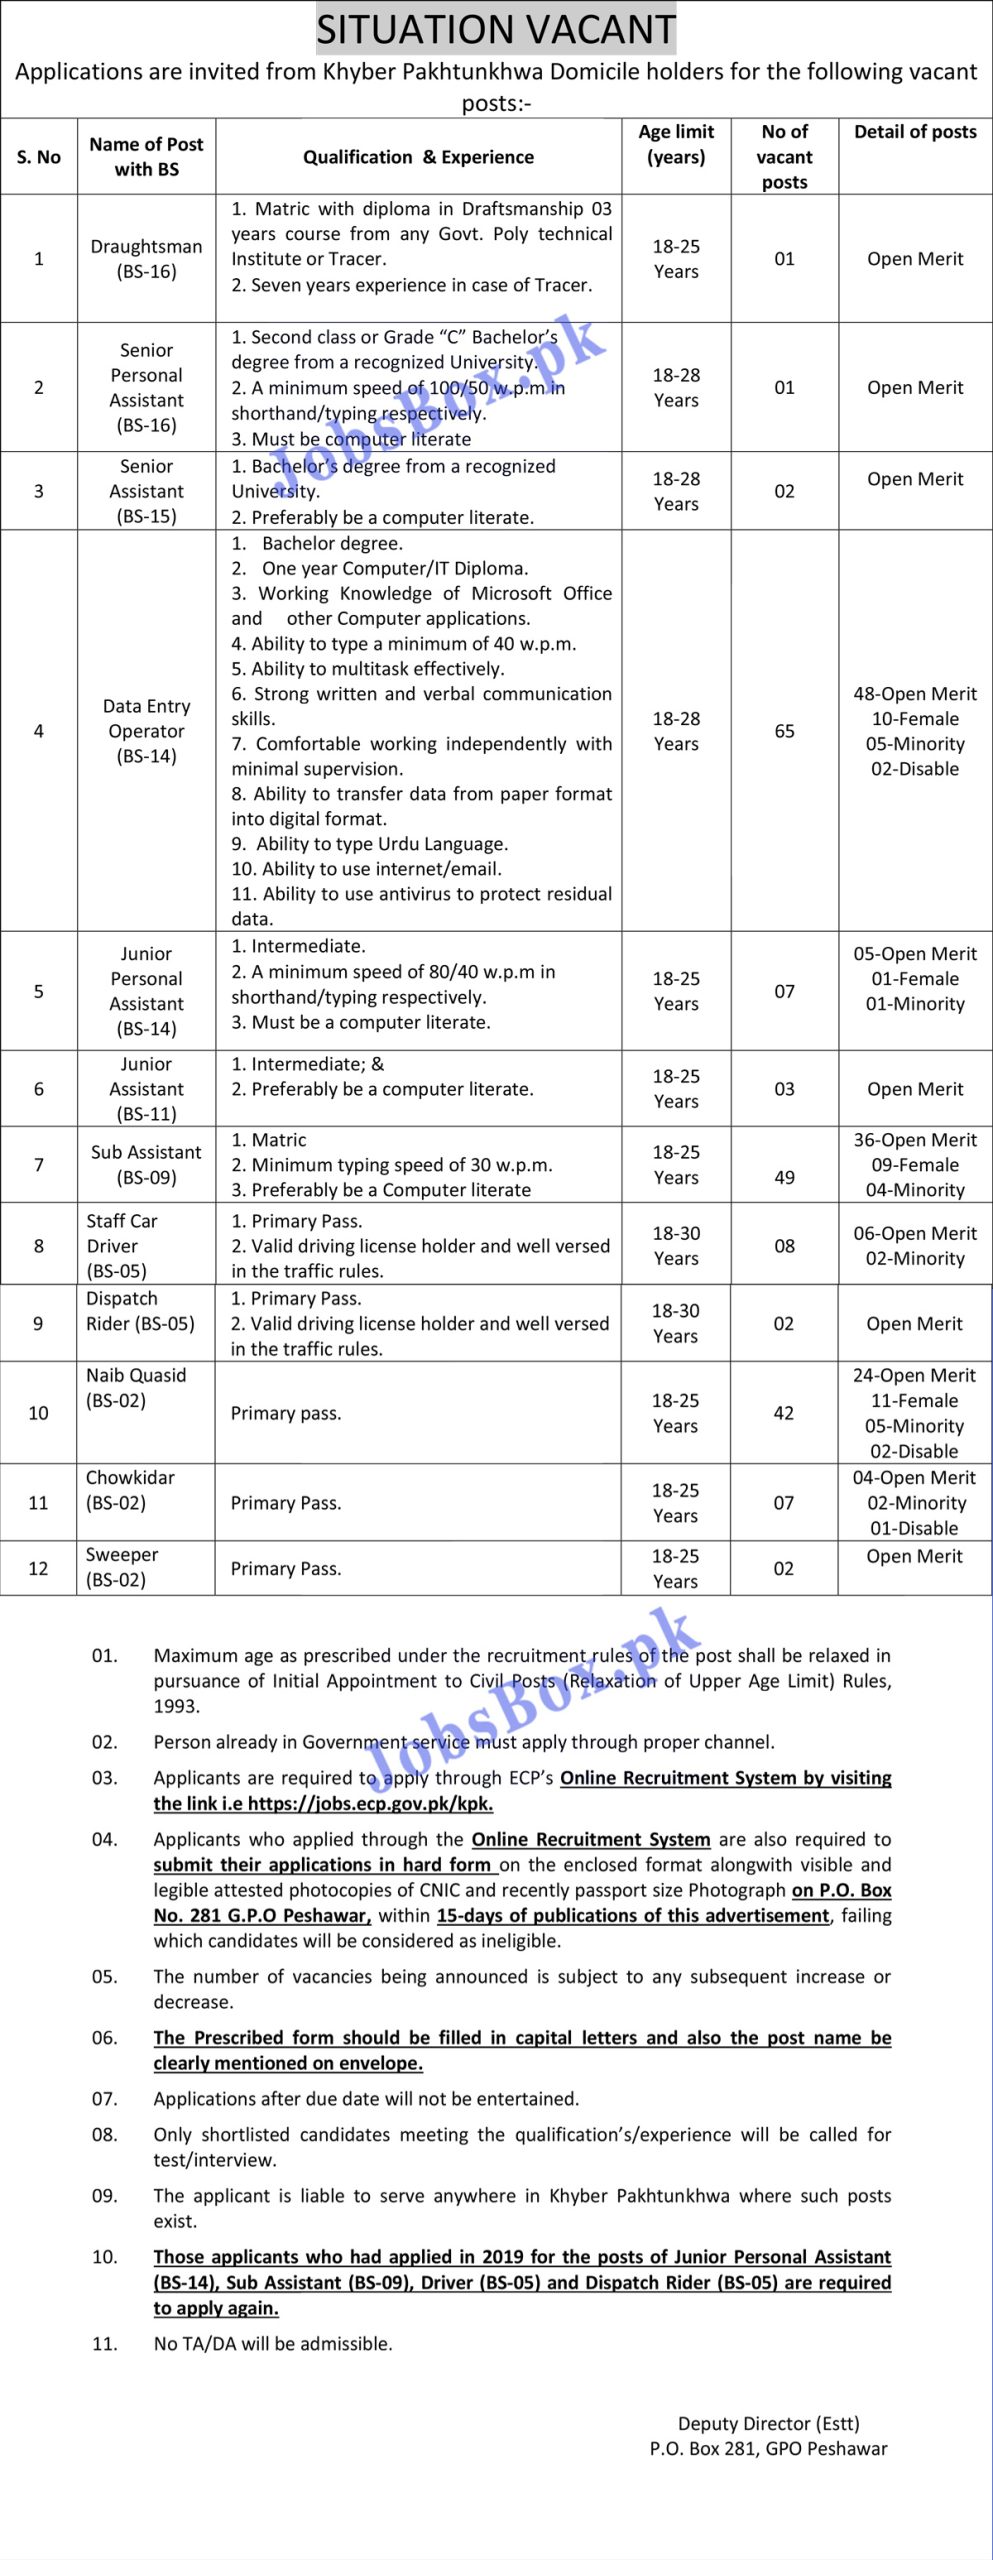 Election Commission of Pakistan ECP Jobs 2021 in KPK - Application Form